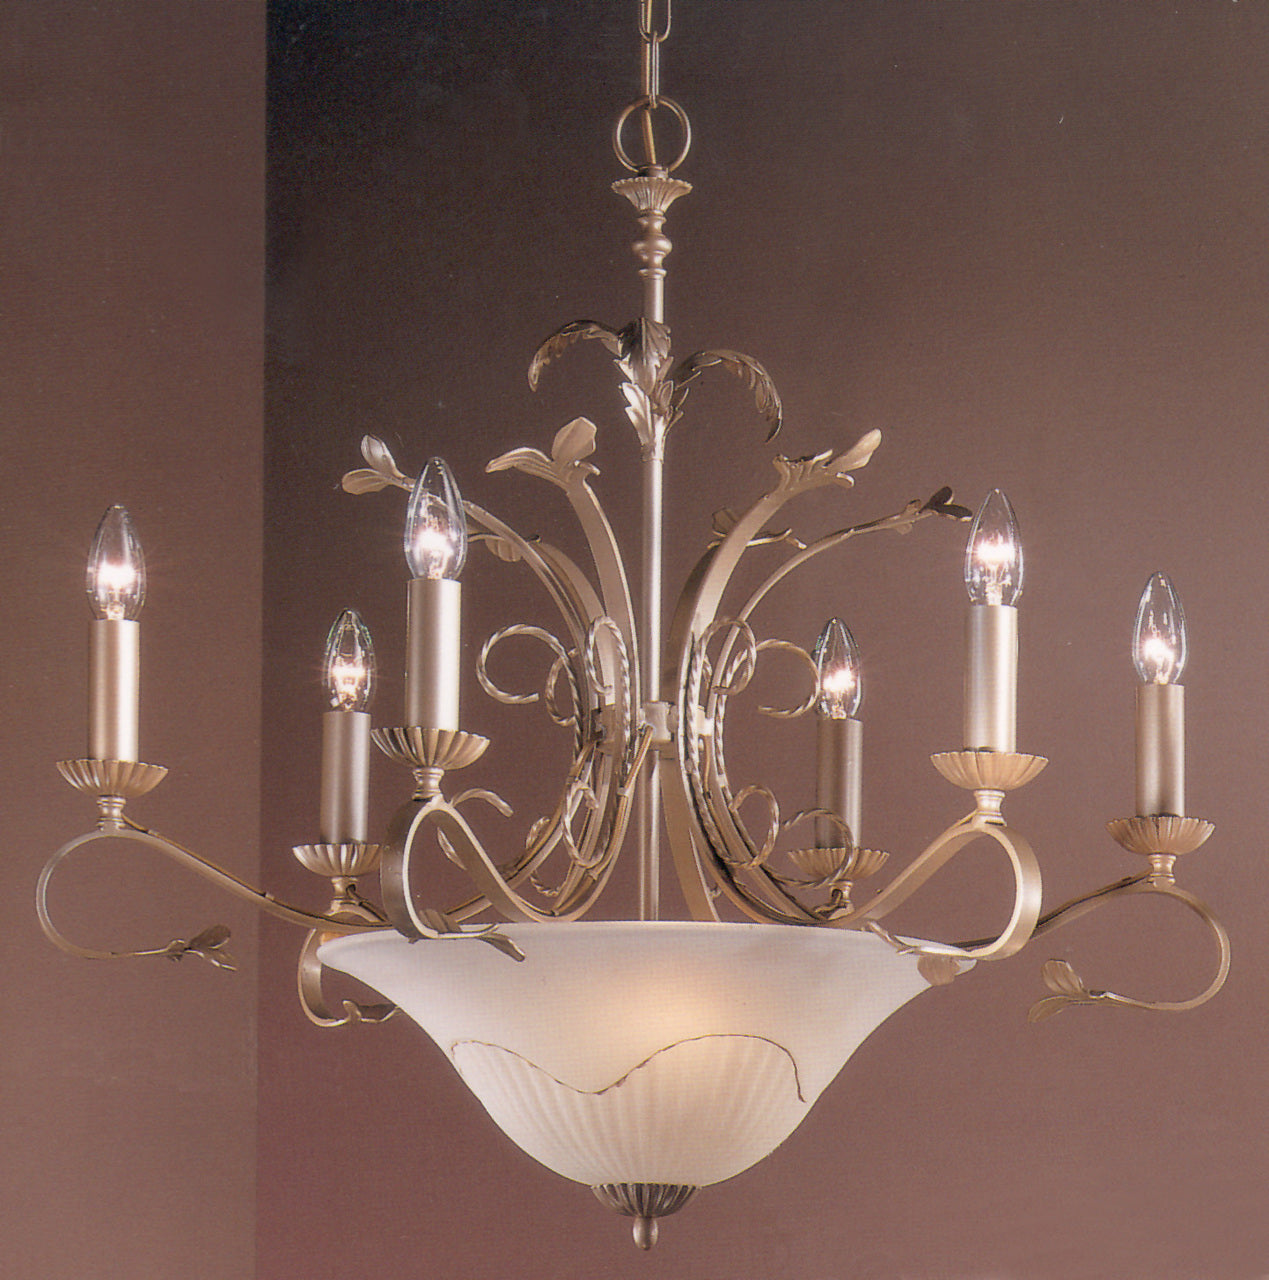 Classic Lighting 4118 PG Treviso Wrought Iron Chandelier in Pearlized Gold (Imported from Italy)